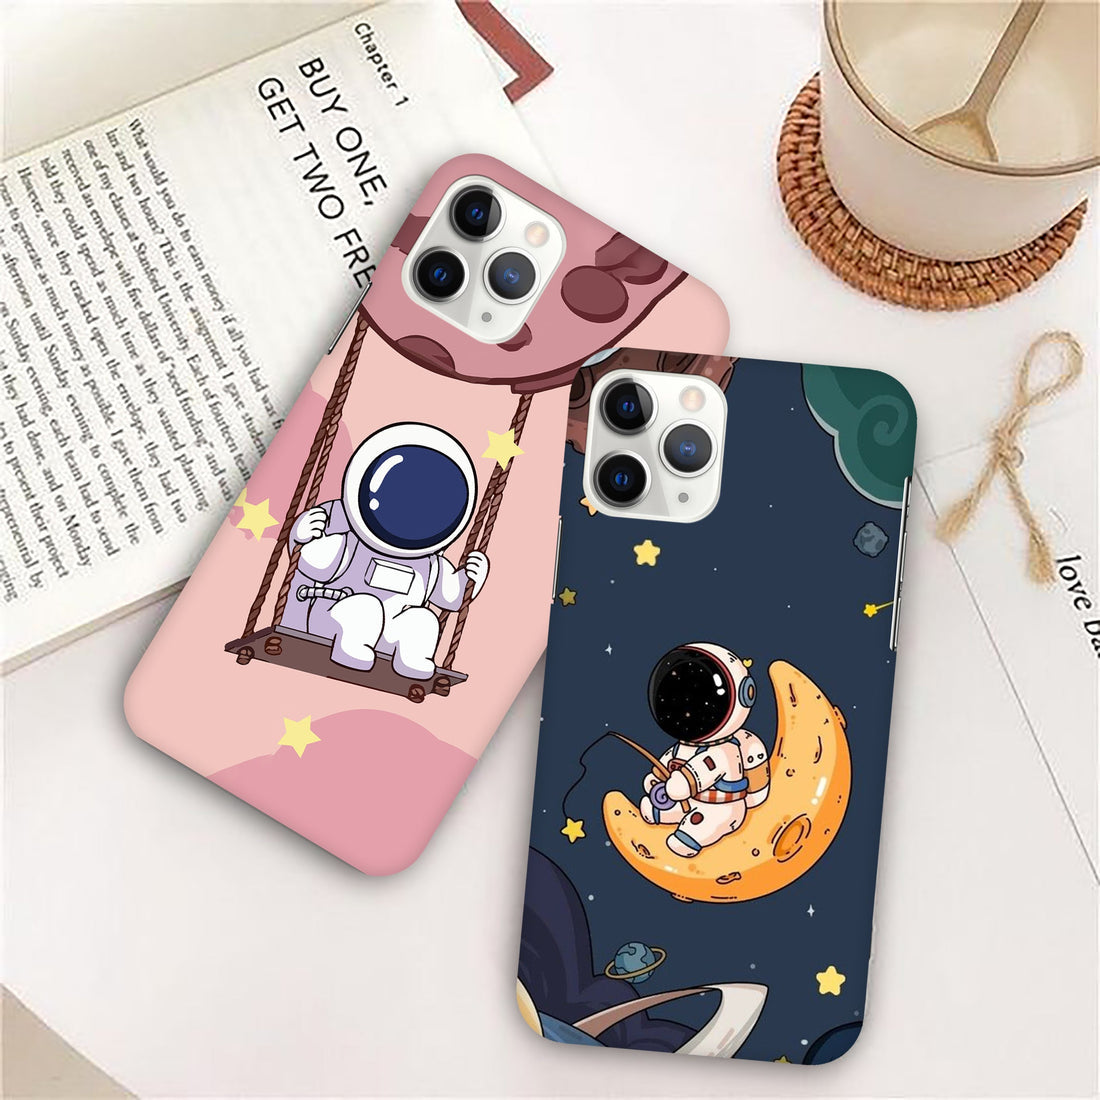 Astronaut Phone Case Cover For Samsung